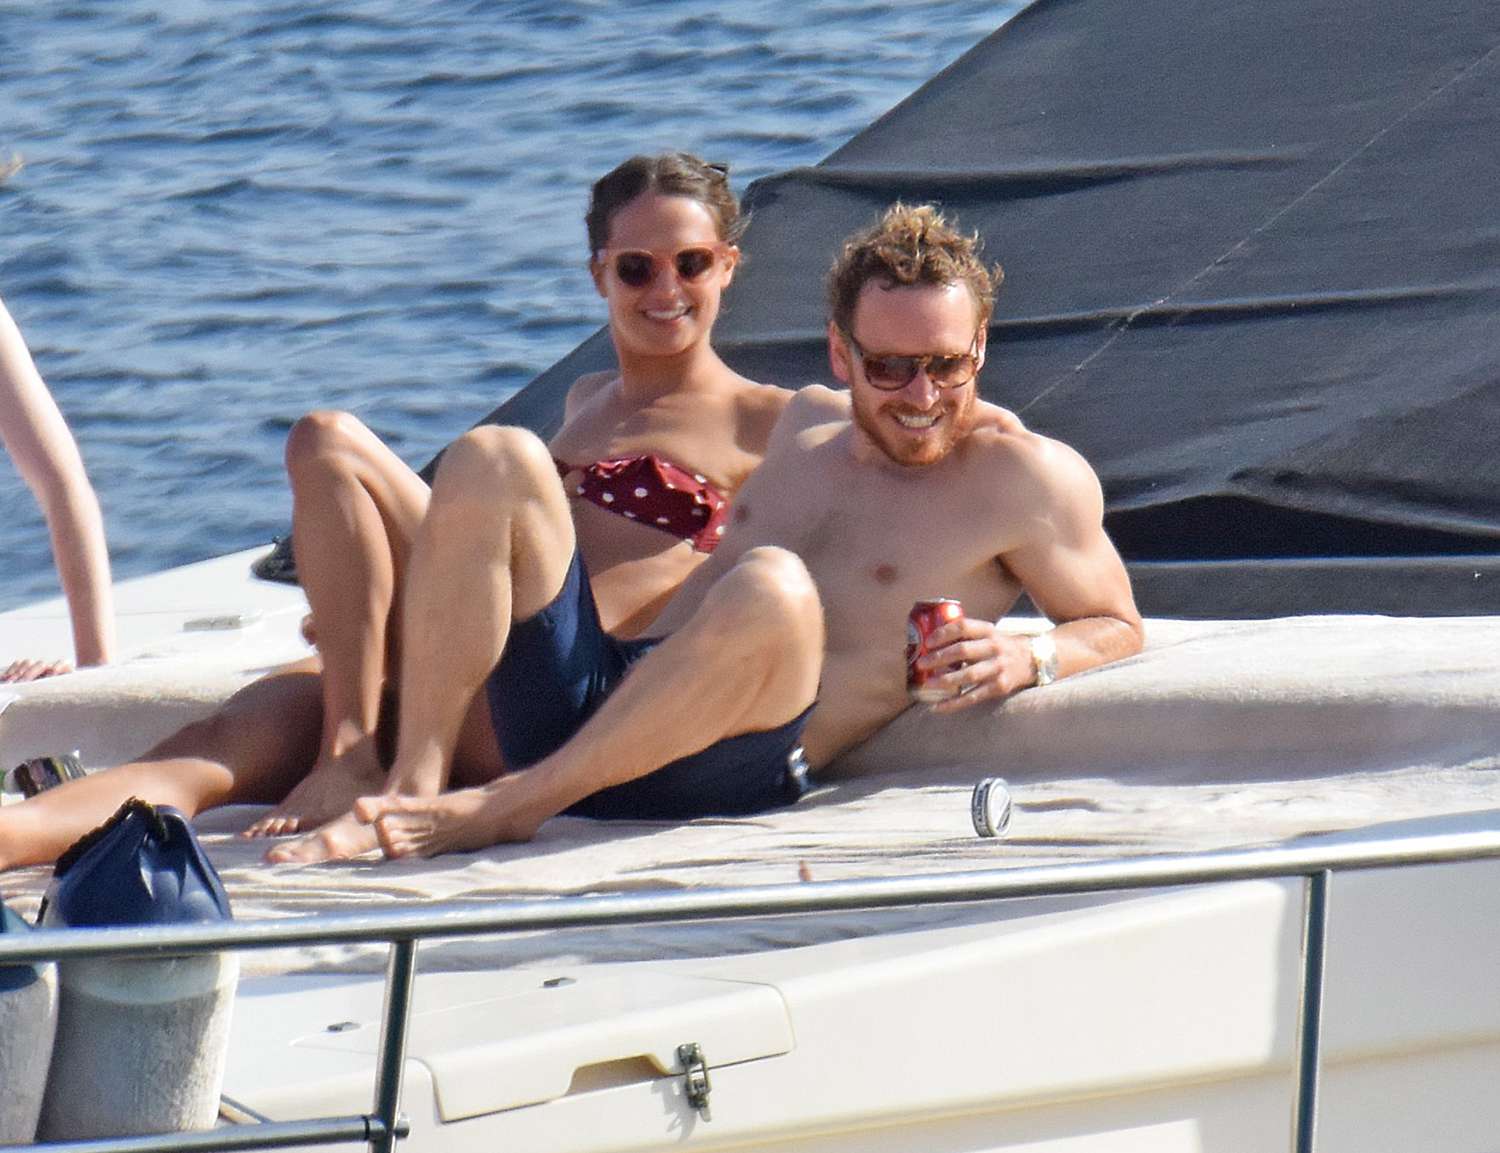 EXCLUSIVE: Alicia Vikander and Michael Fassbender on holidays in Formentera